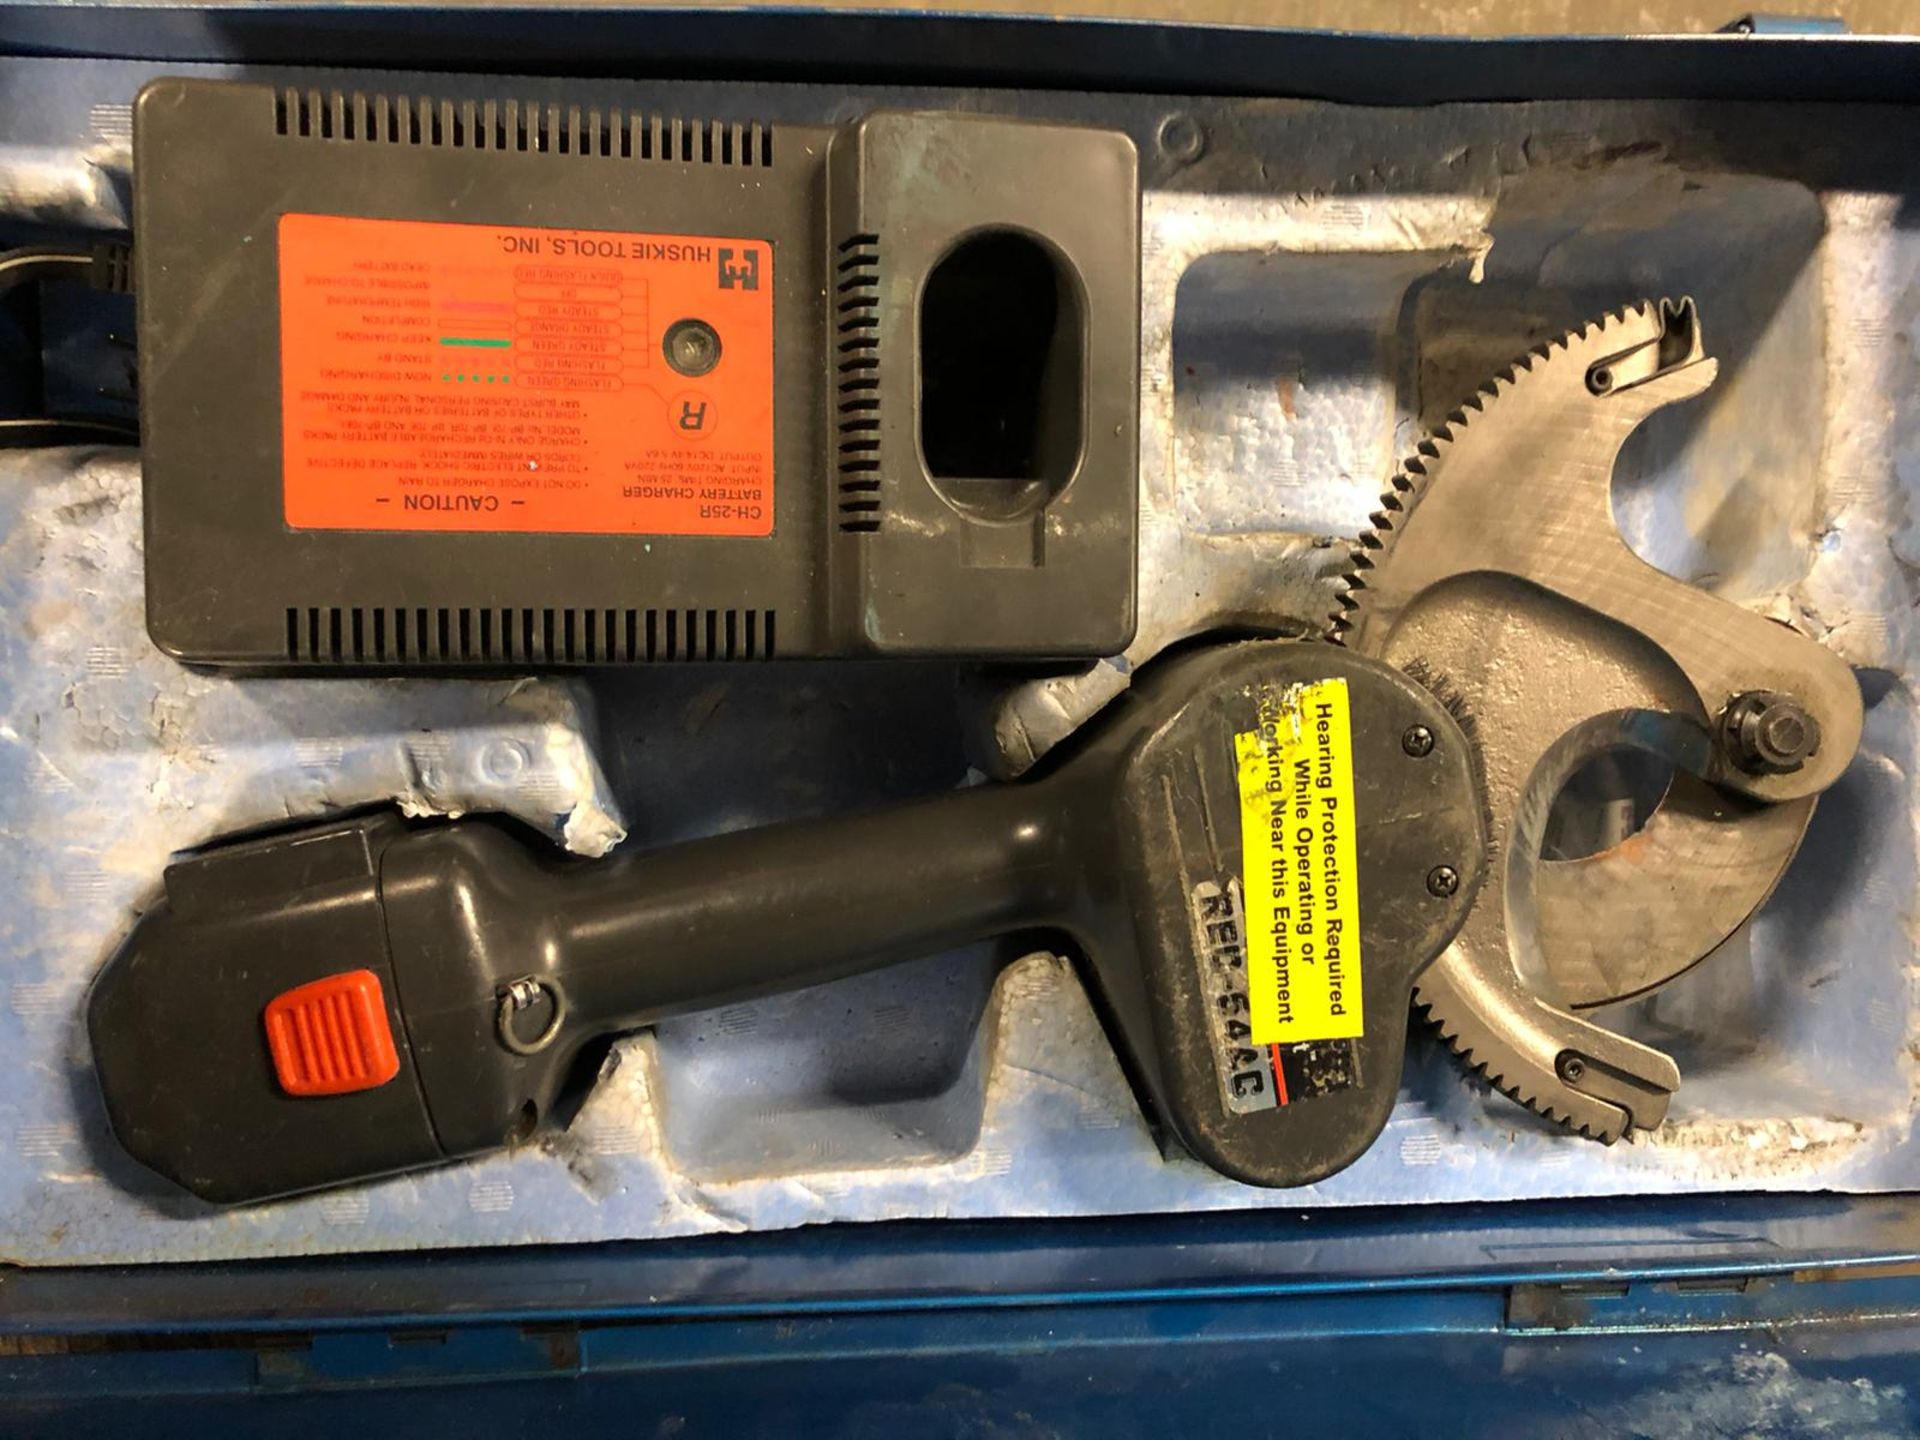 Huskie Rolo-Cut model REC-54AC Handheld Cutter Tool in case with charger